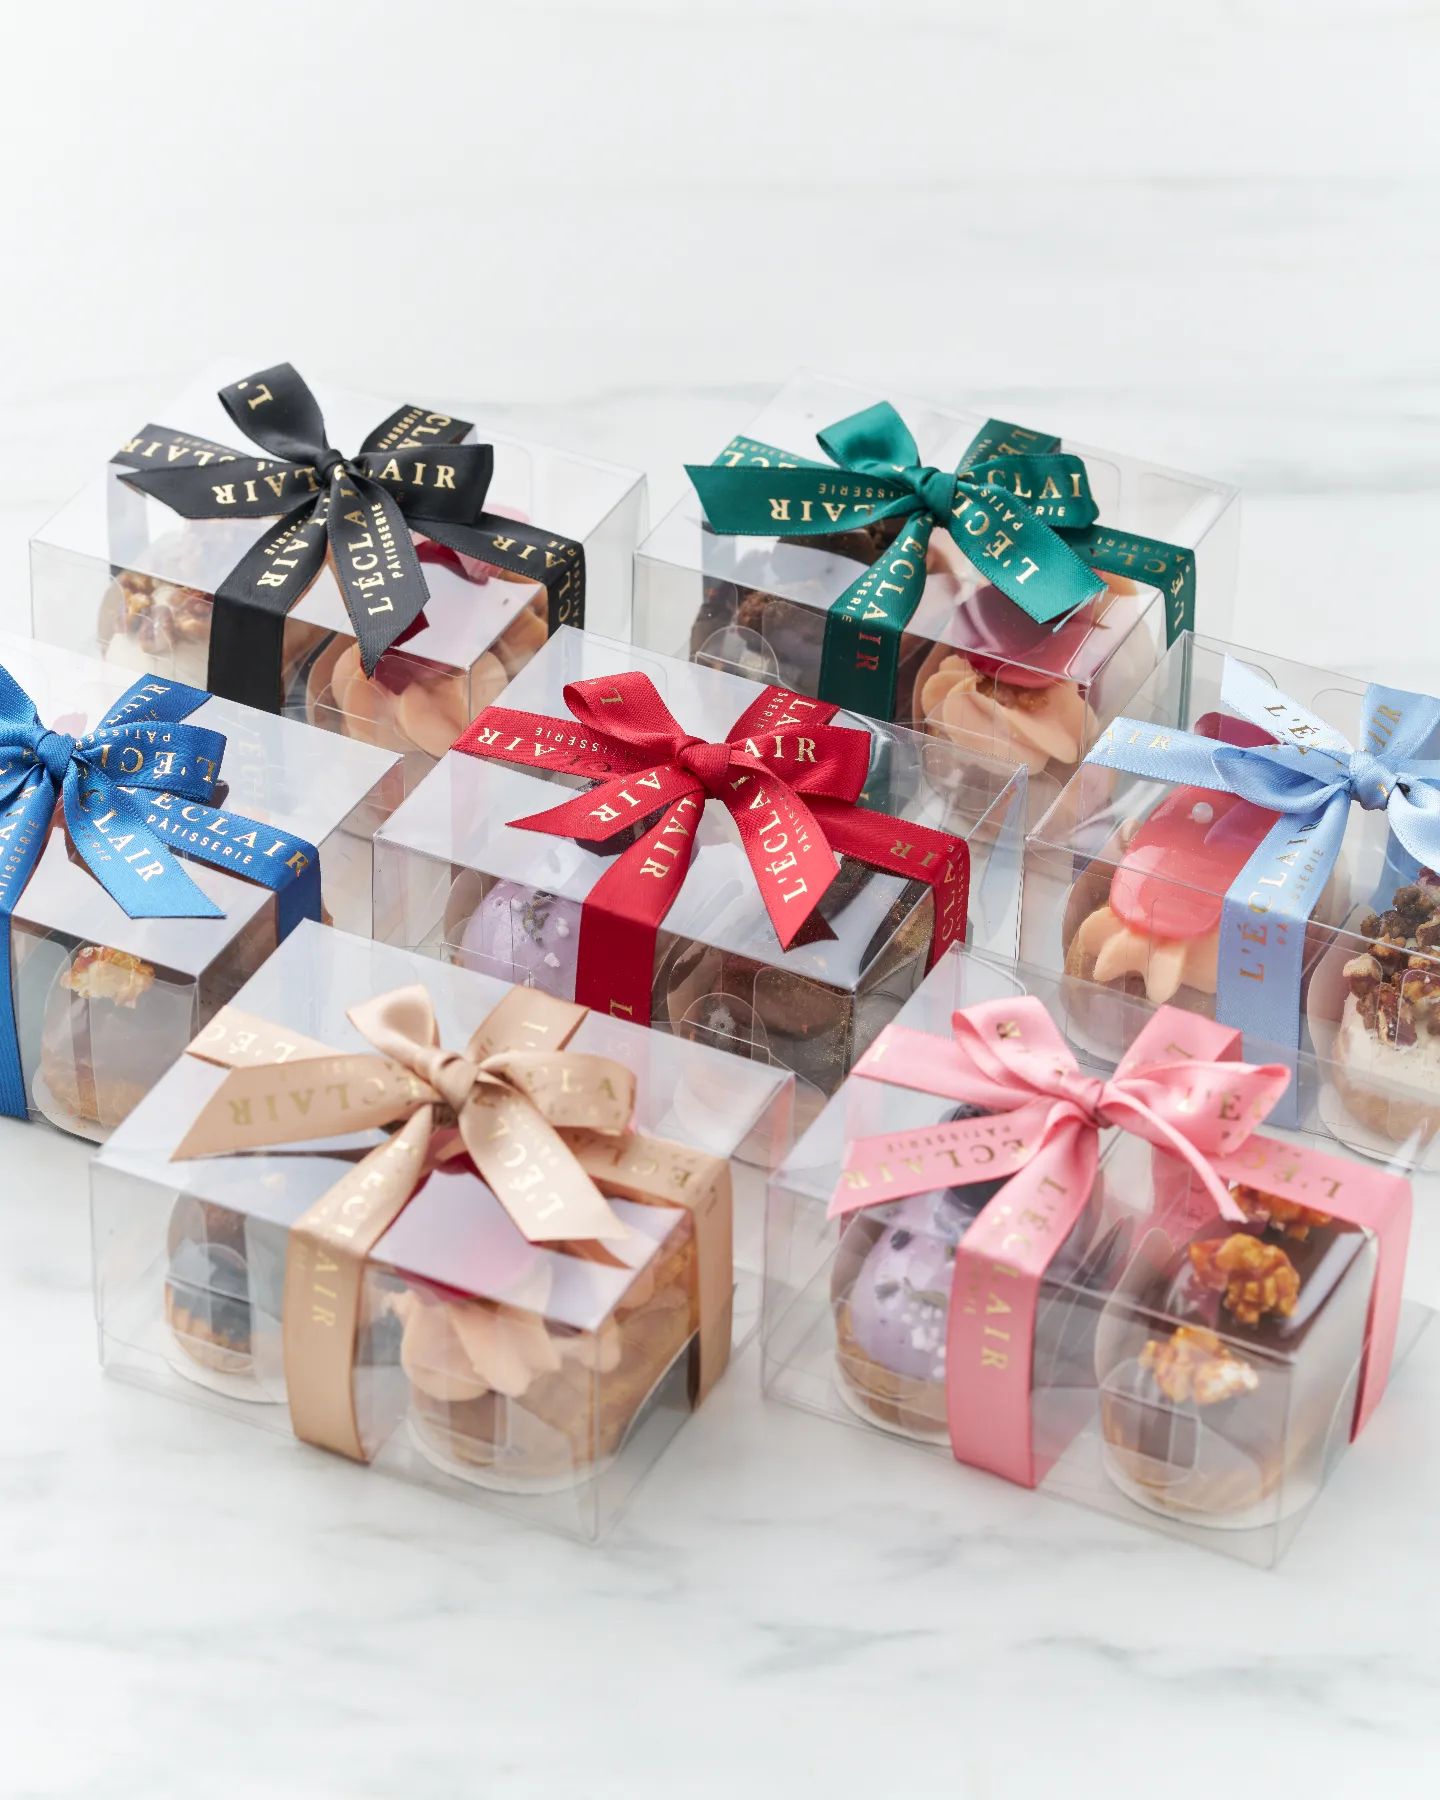 A gift from the heart for every occasion ❤️ 

Customise these edible favours with any two éclair flavours. Each box is complete with a beautiful ribbon of your choice. 

Check out the preorder details on our website - www.leclair.com.sg/shop.